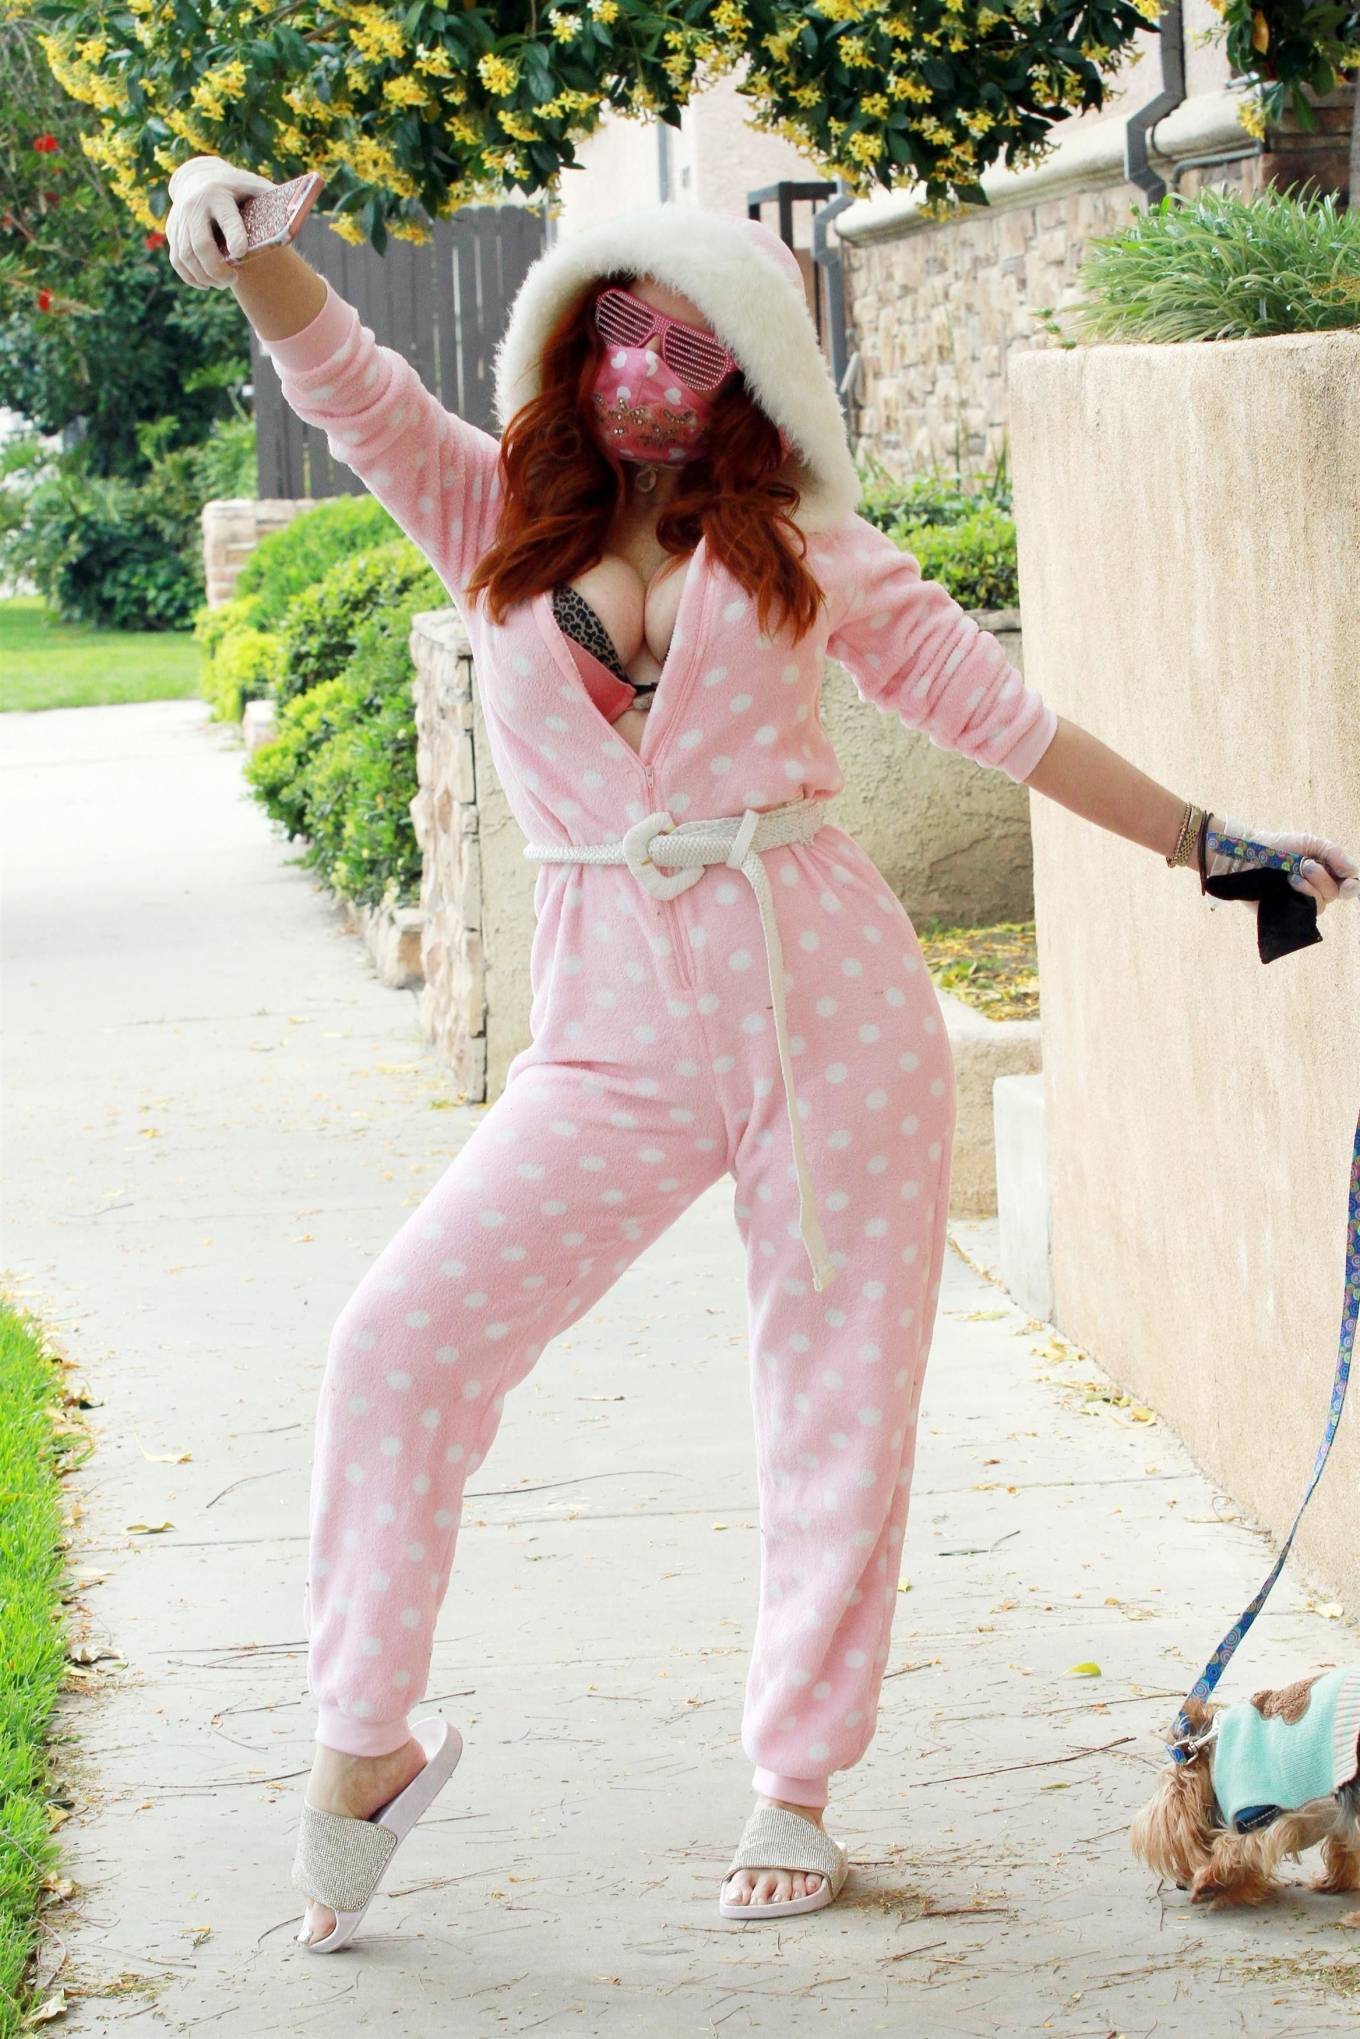 Phoebe Price â€“ Wearing her pajamas while out for dog walk and paparazzi attention